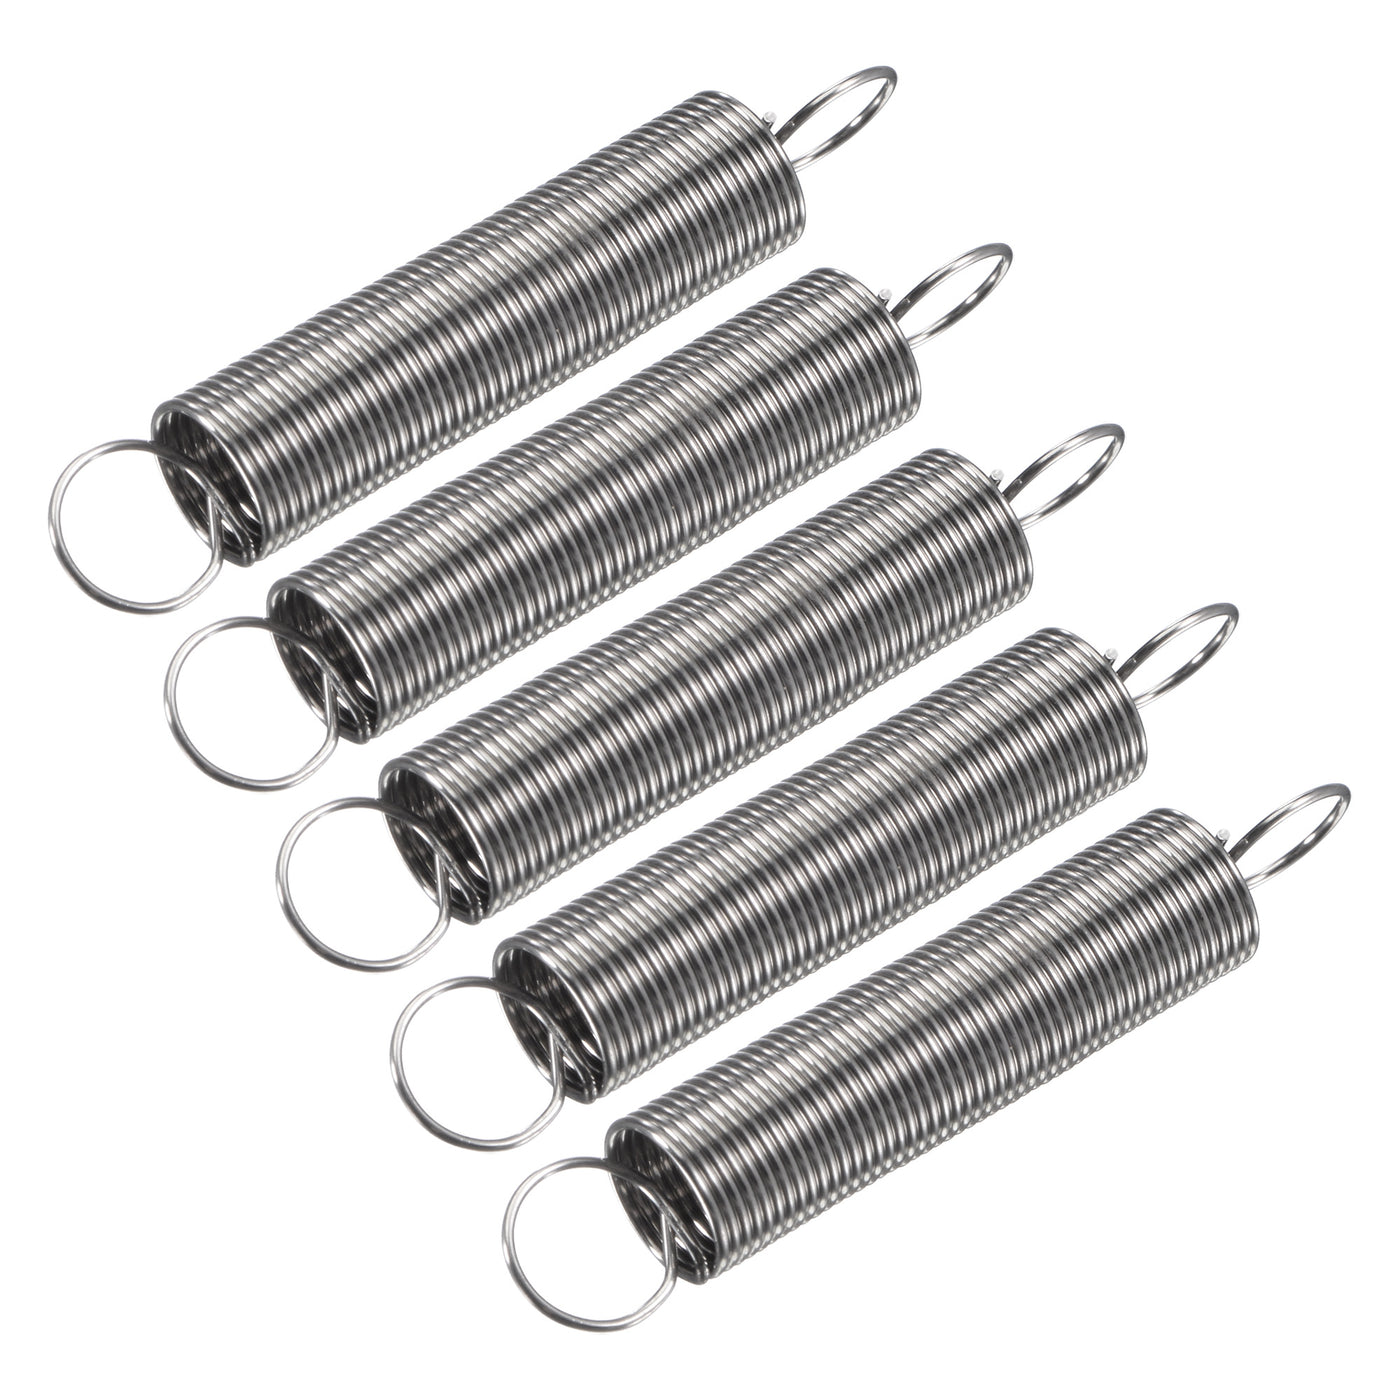 Uxcell Uxcell 0.6mmx8mmx60mm Extended Compression Spring,2.3Lbs Load Capacity,Silver,5pcs